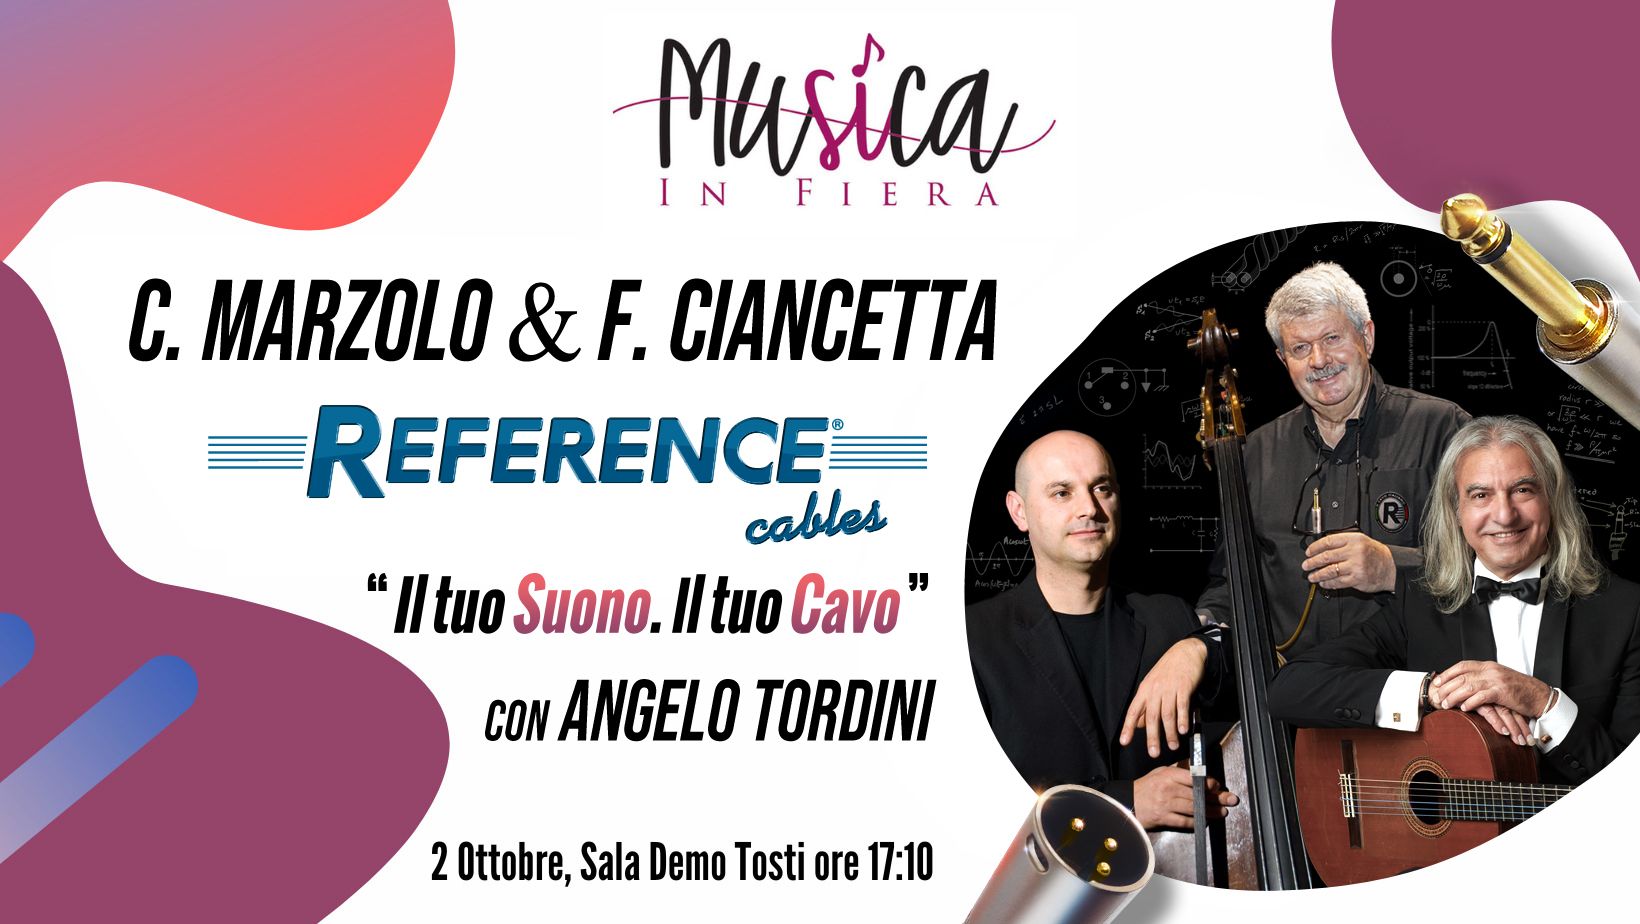 Reference Cable Musica In Fiera